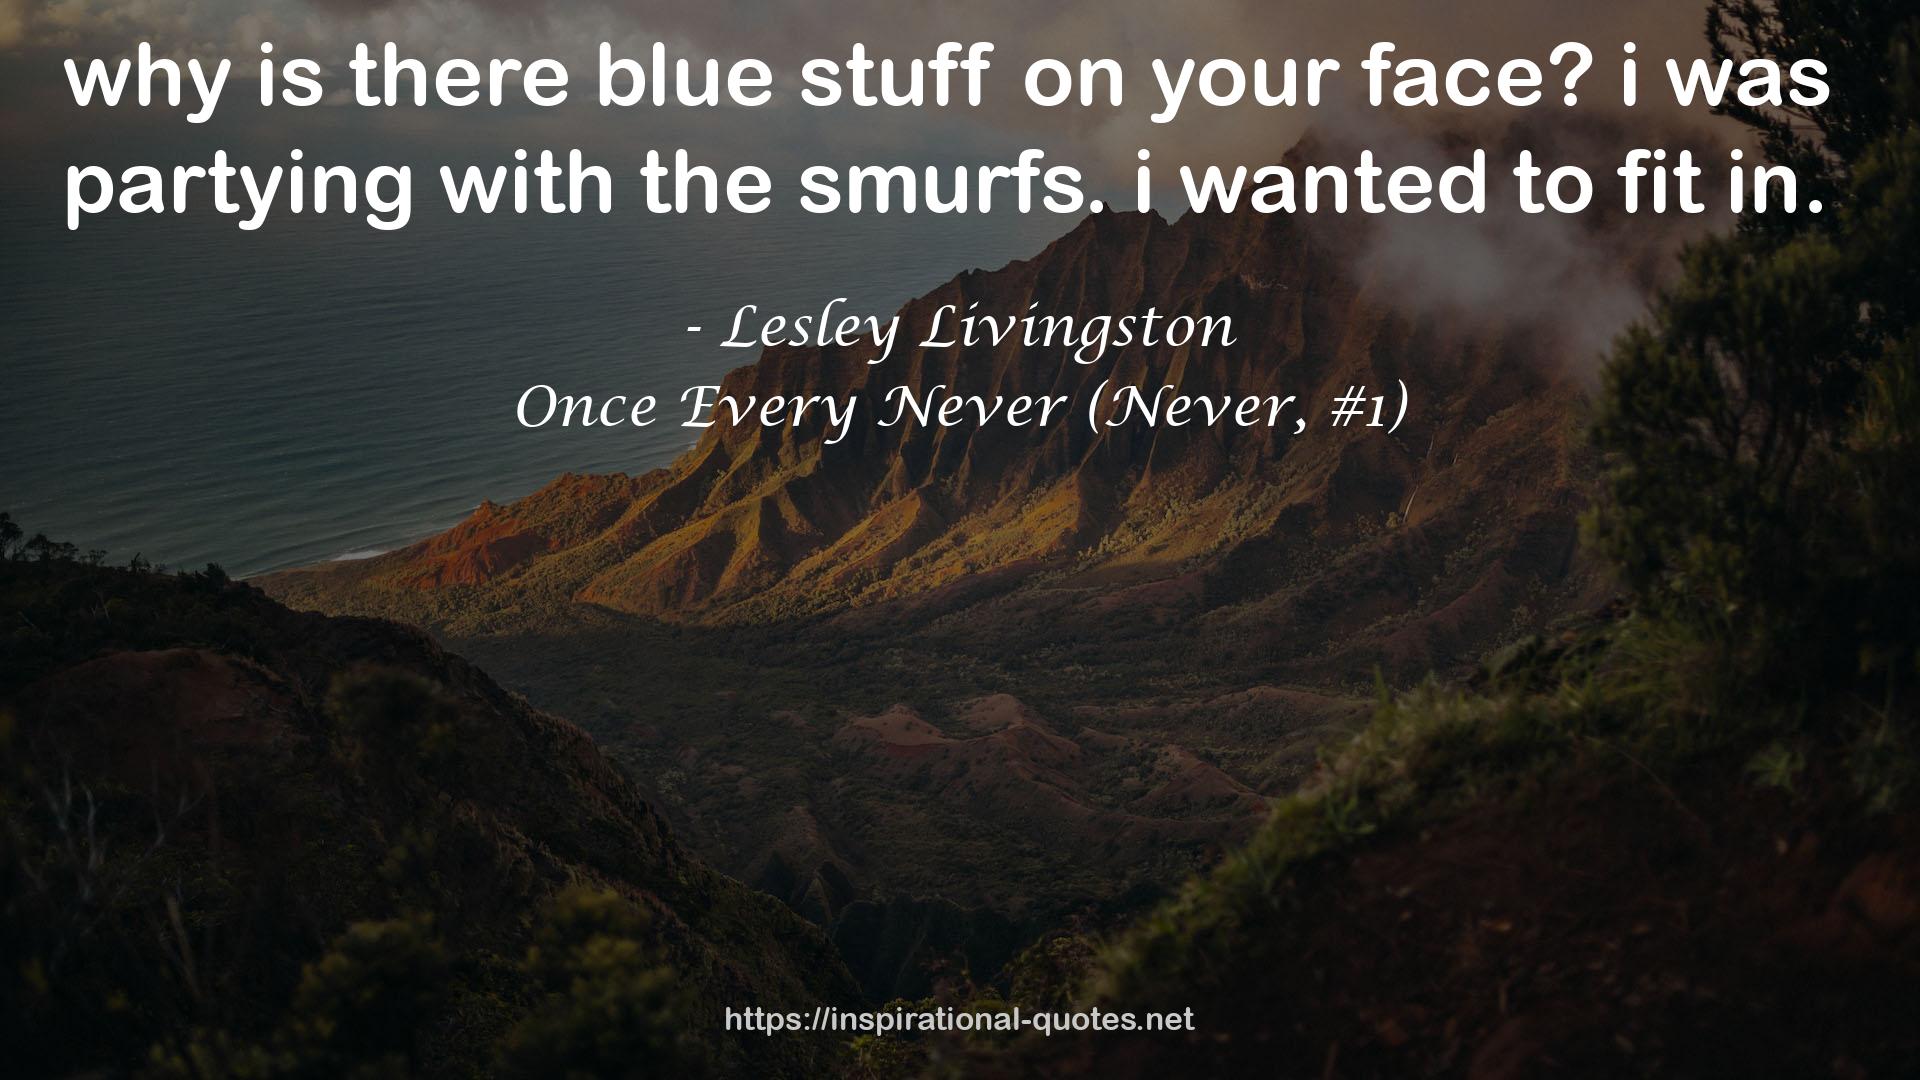 Once Every Never (Never, #1) QUOTES